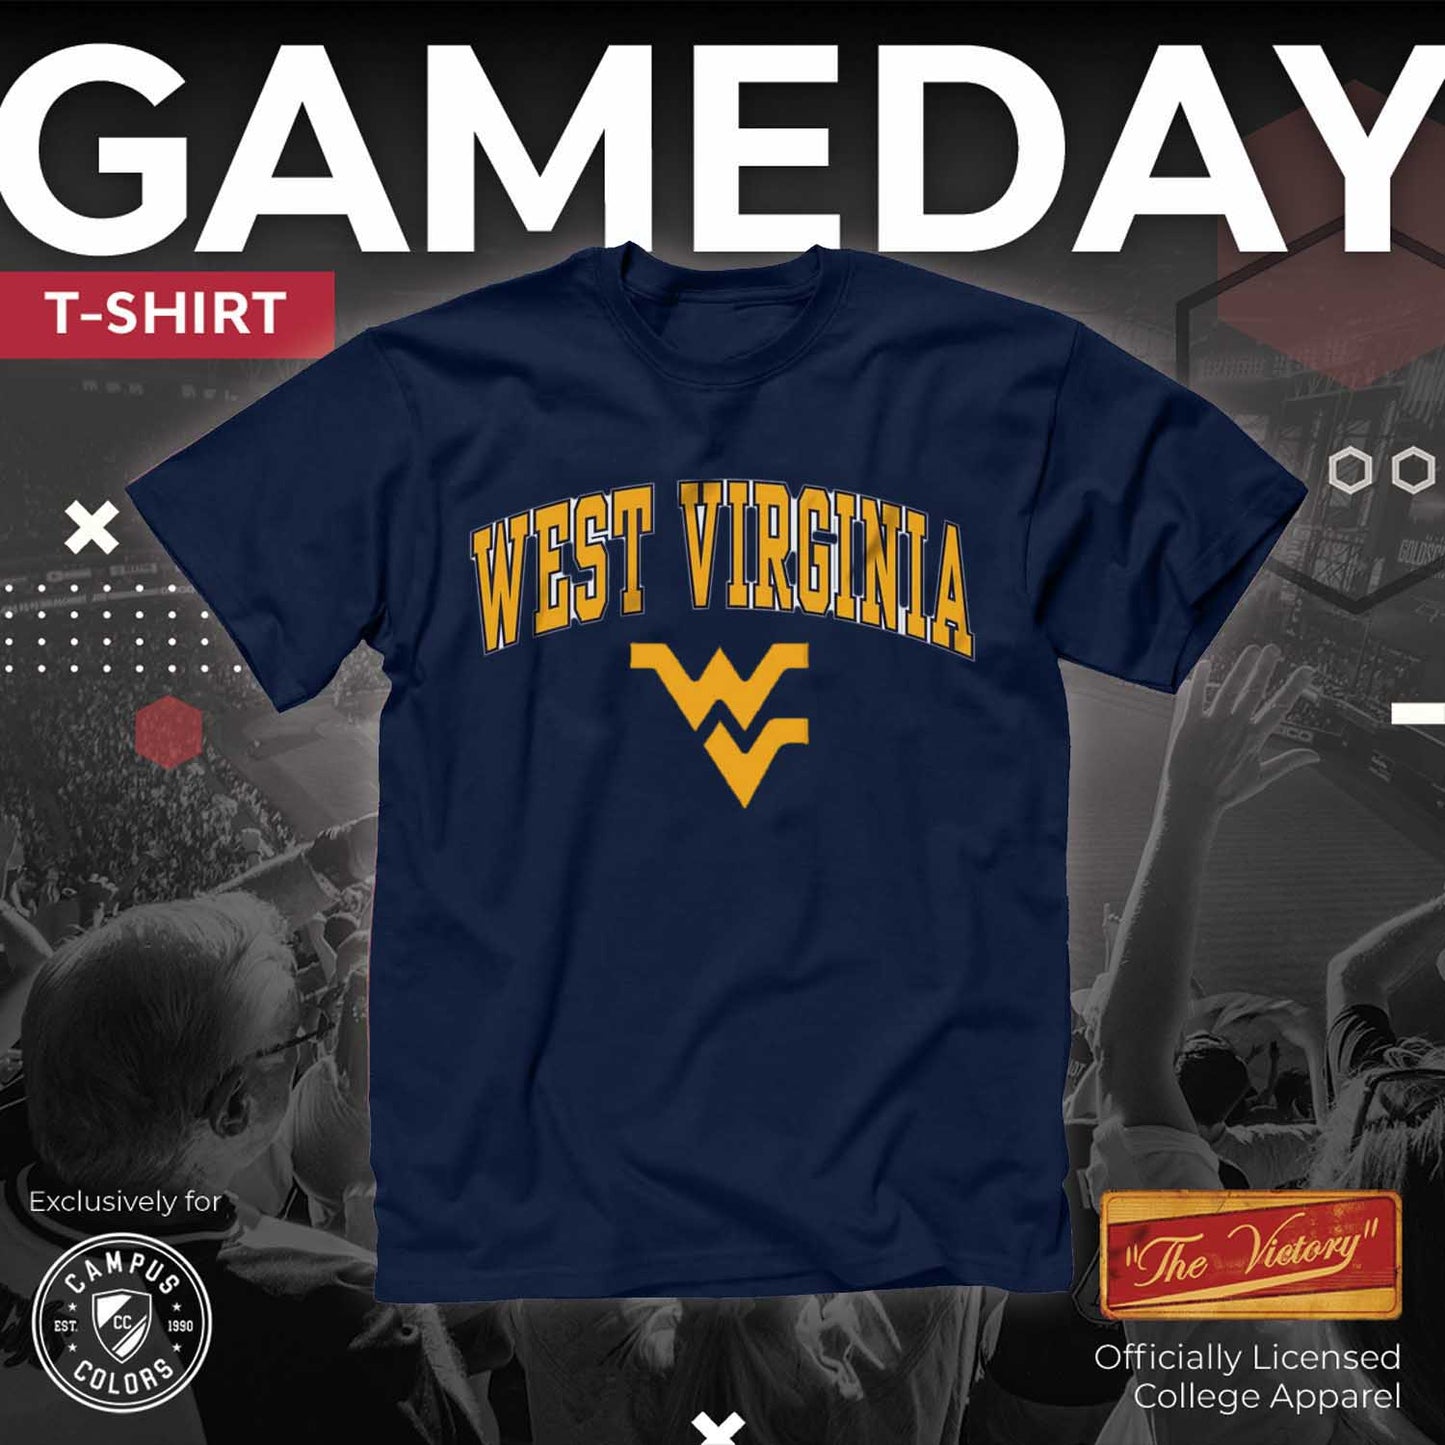 West Virginia Mountaineers NCAA Adult Gameday Cotton T-Shirt - Navy